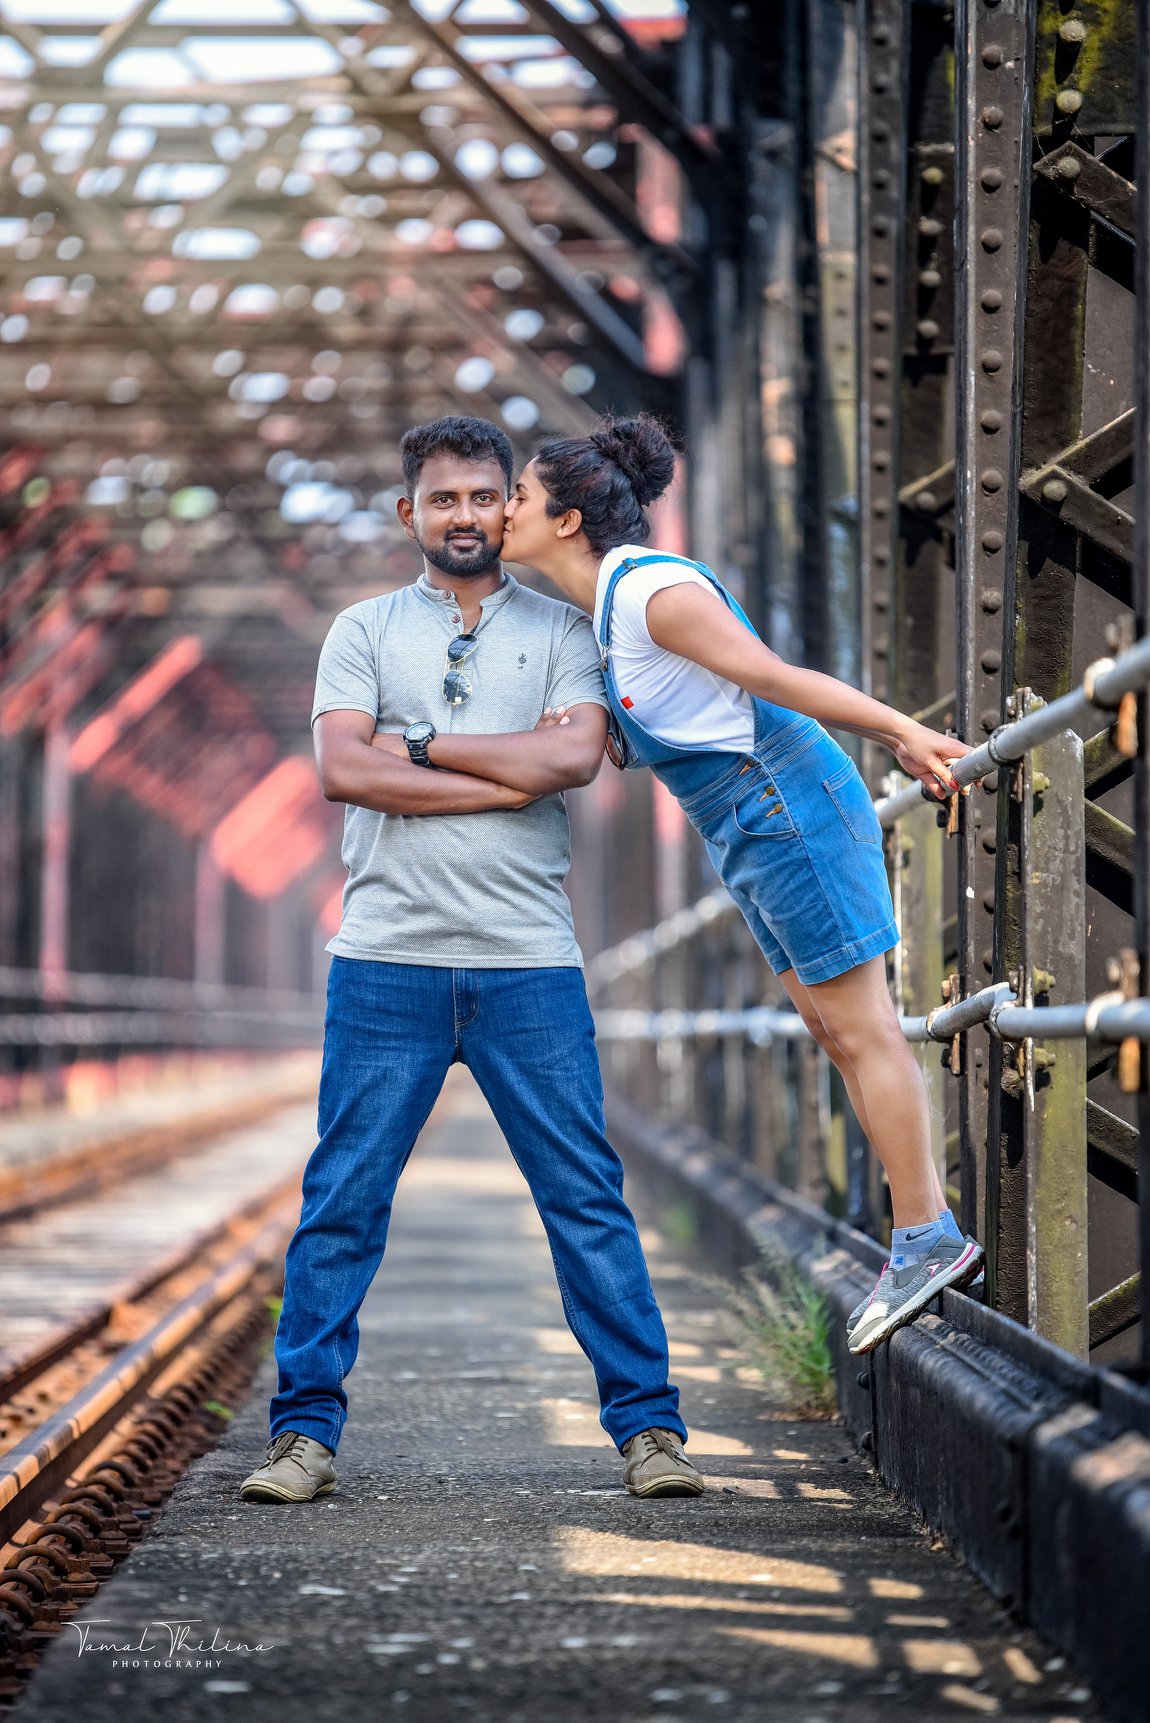 Pre shoot Moment of Chami & Sujith